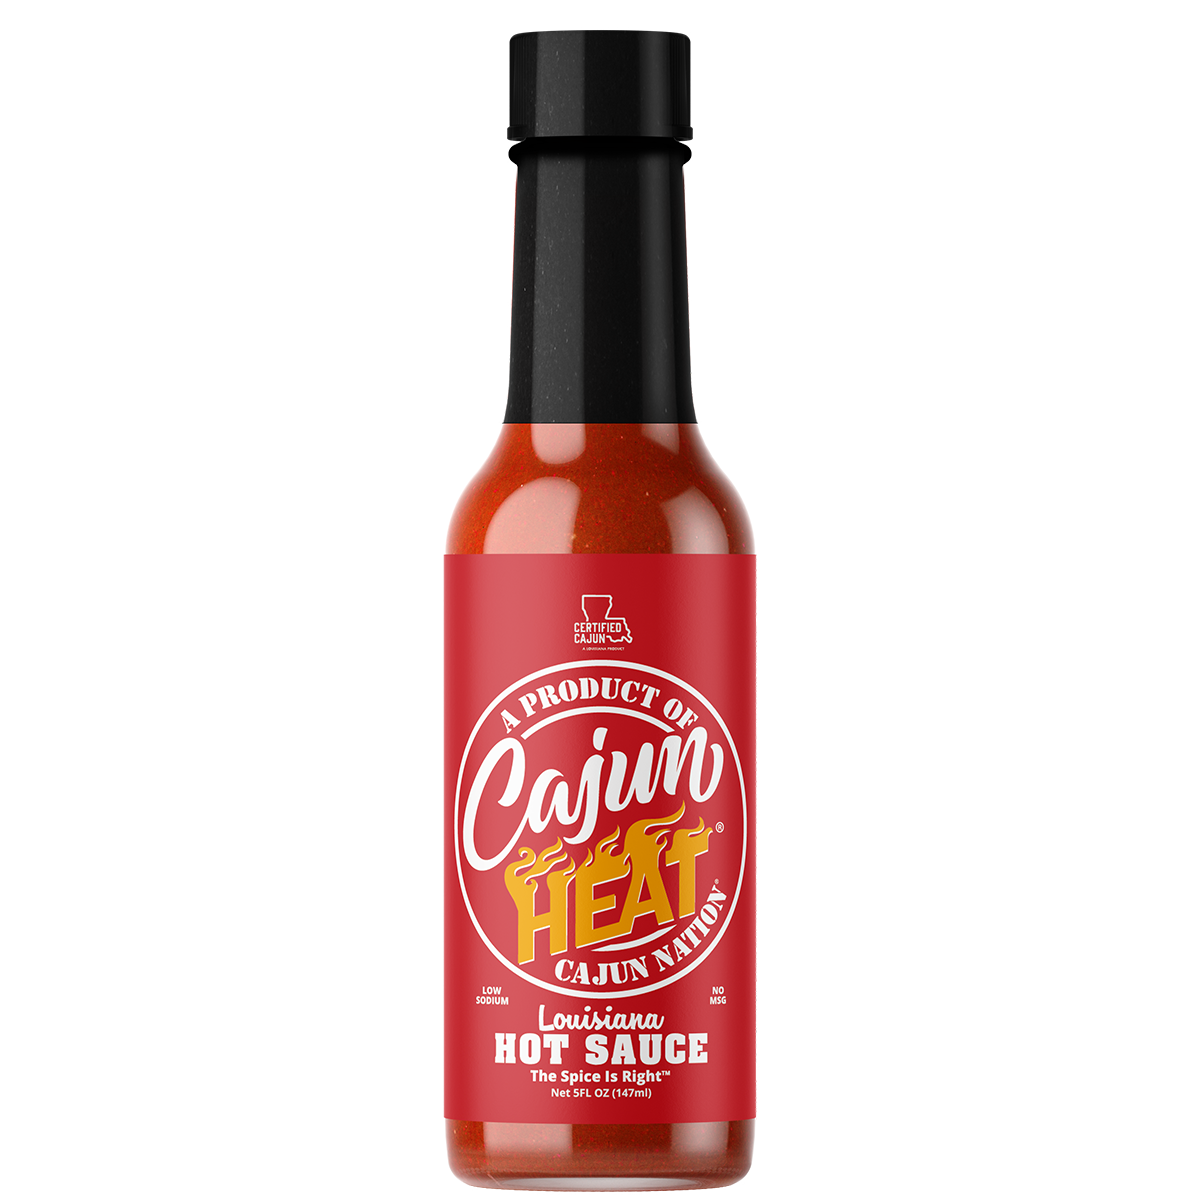 Cajun Nation Cajun Heat Low Sodium Louisiana Hot Sauce is a Certified Cajun LOW SODIUM 5 fluid ounces, flavorful blend of Louisiana Red Peppers with No MSG.  It contains 100mg of sodium.  Made in Cajun Nation, Louisiana along the Cajun Coast. 